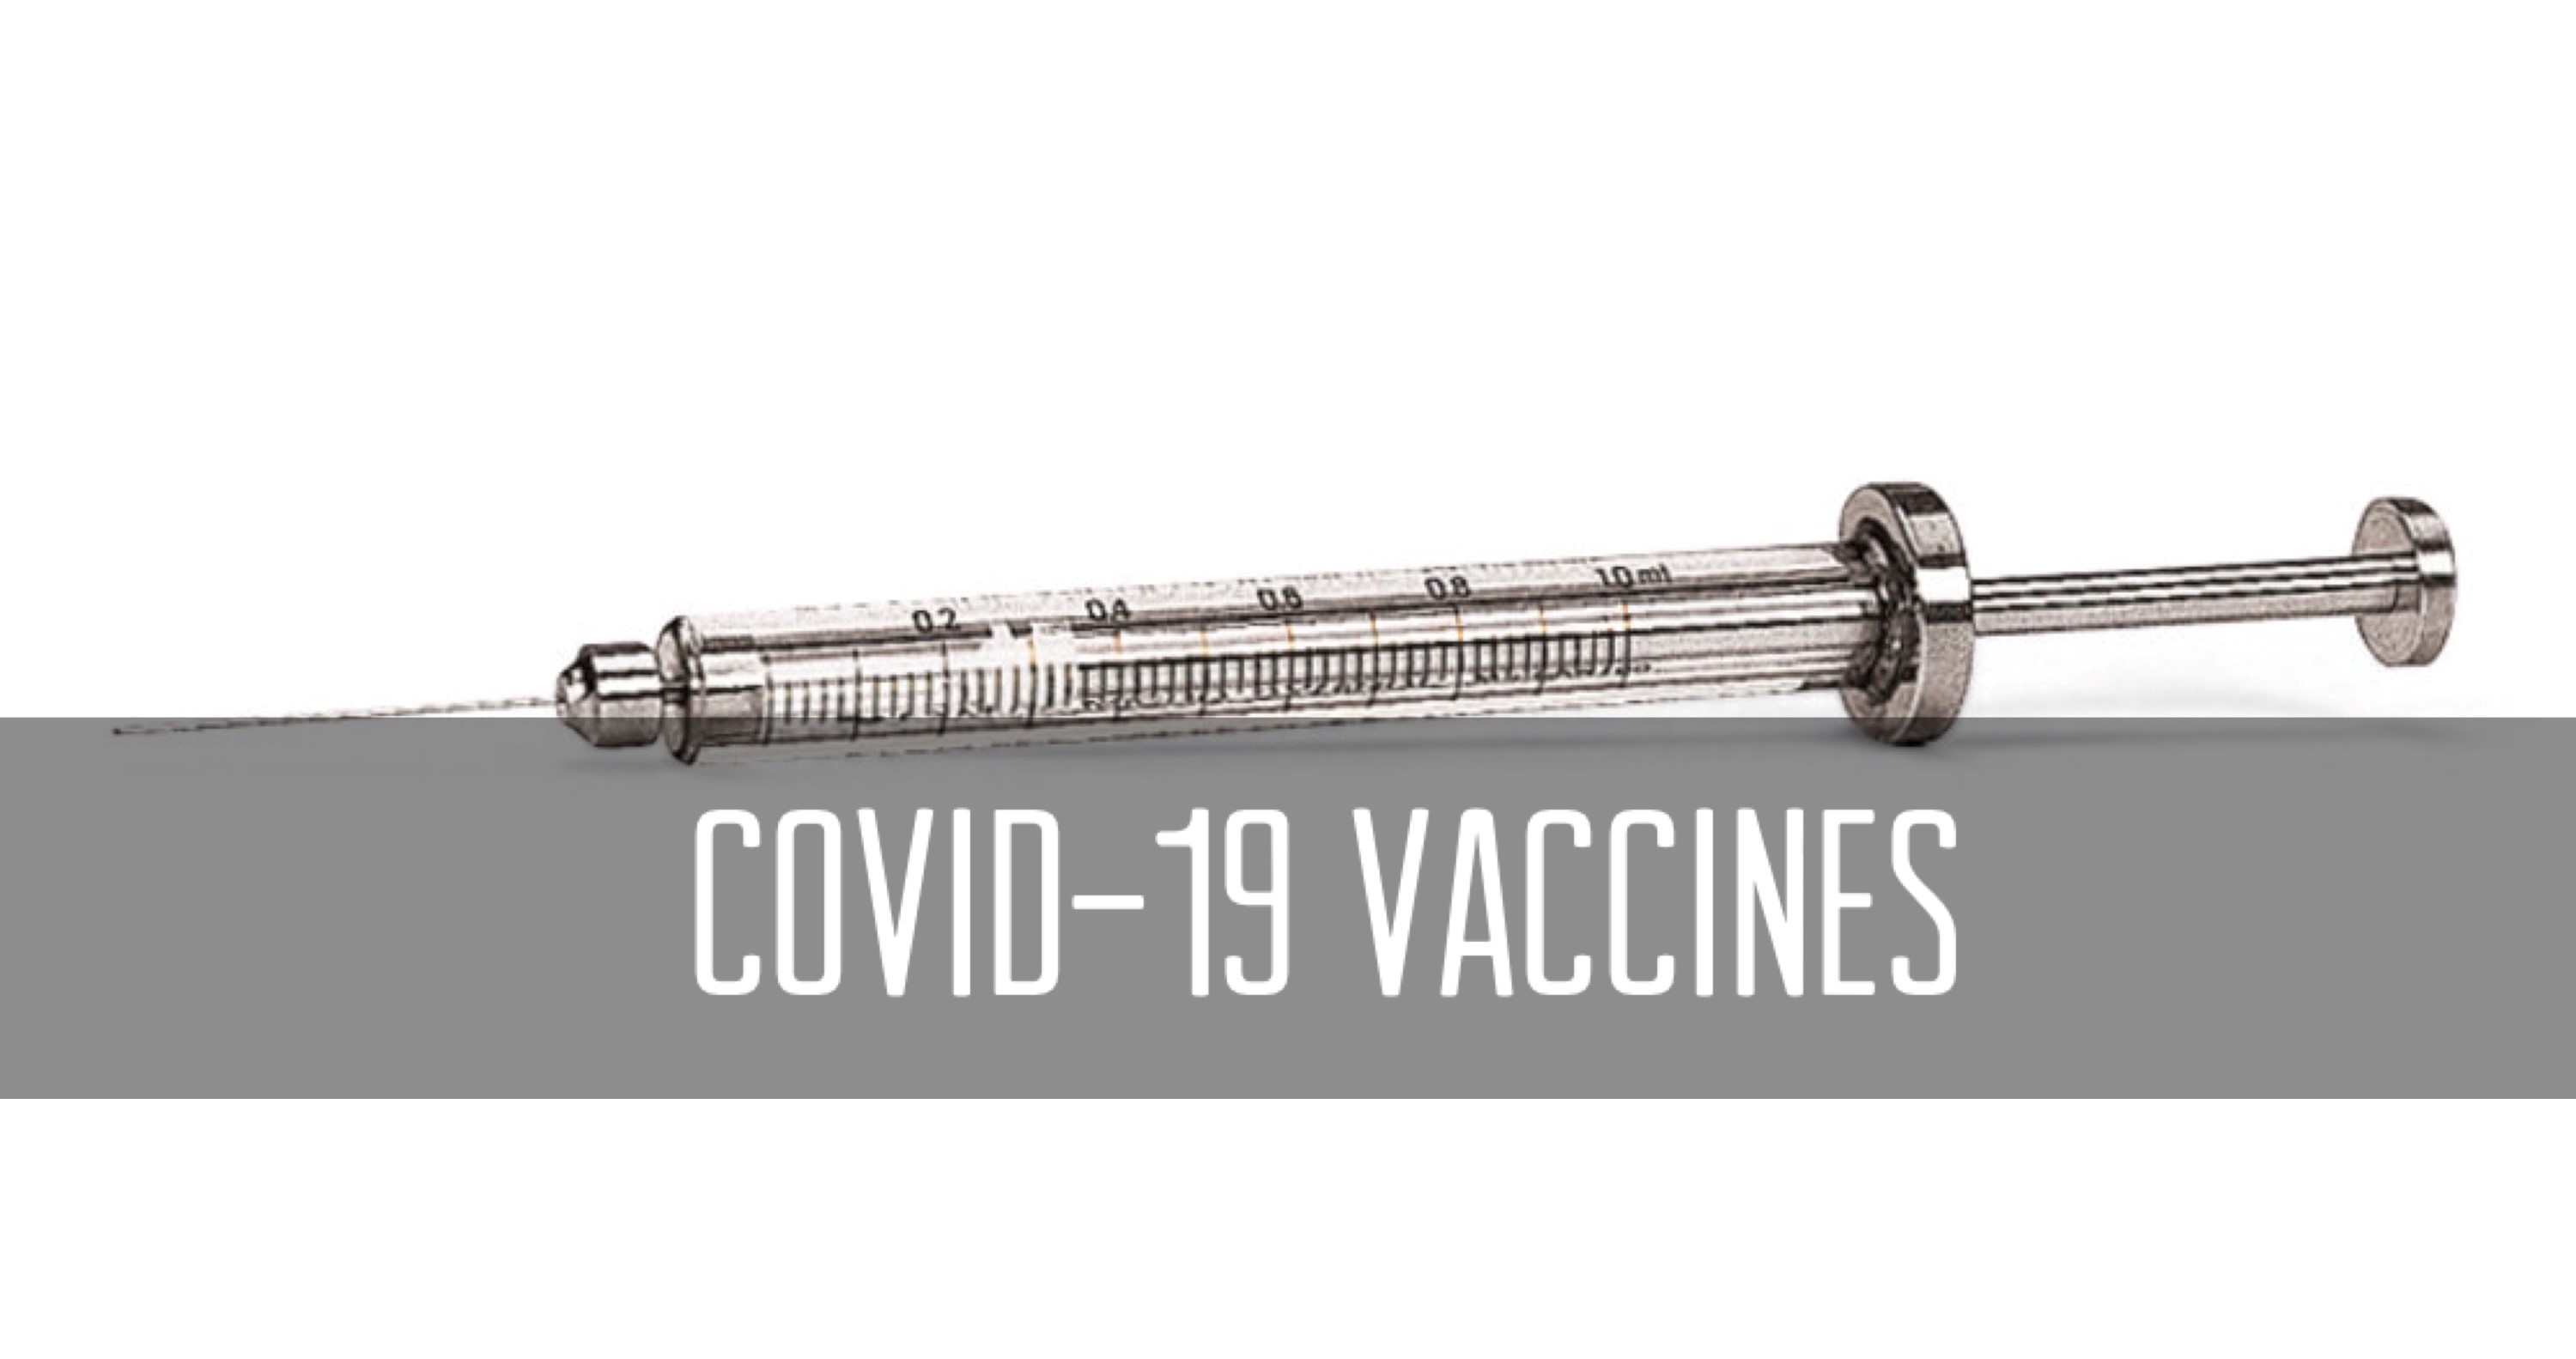 How COVID-19 Vaccines work